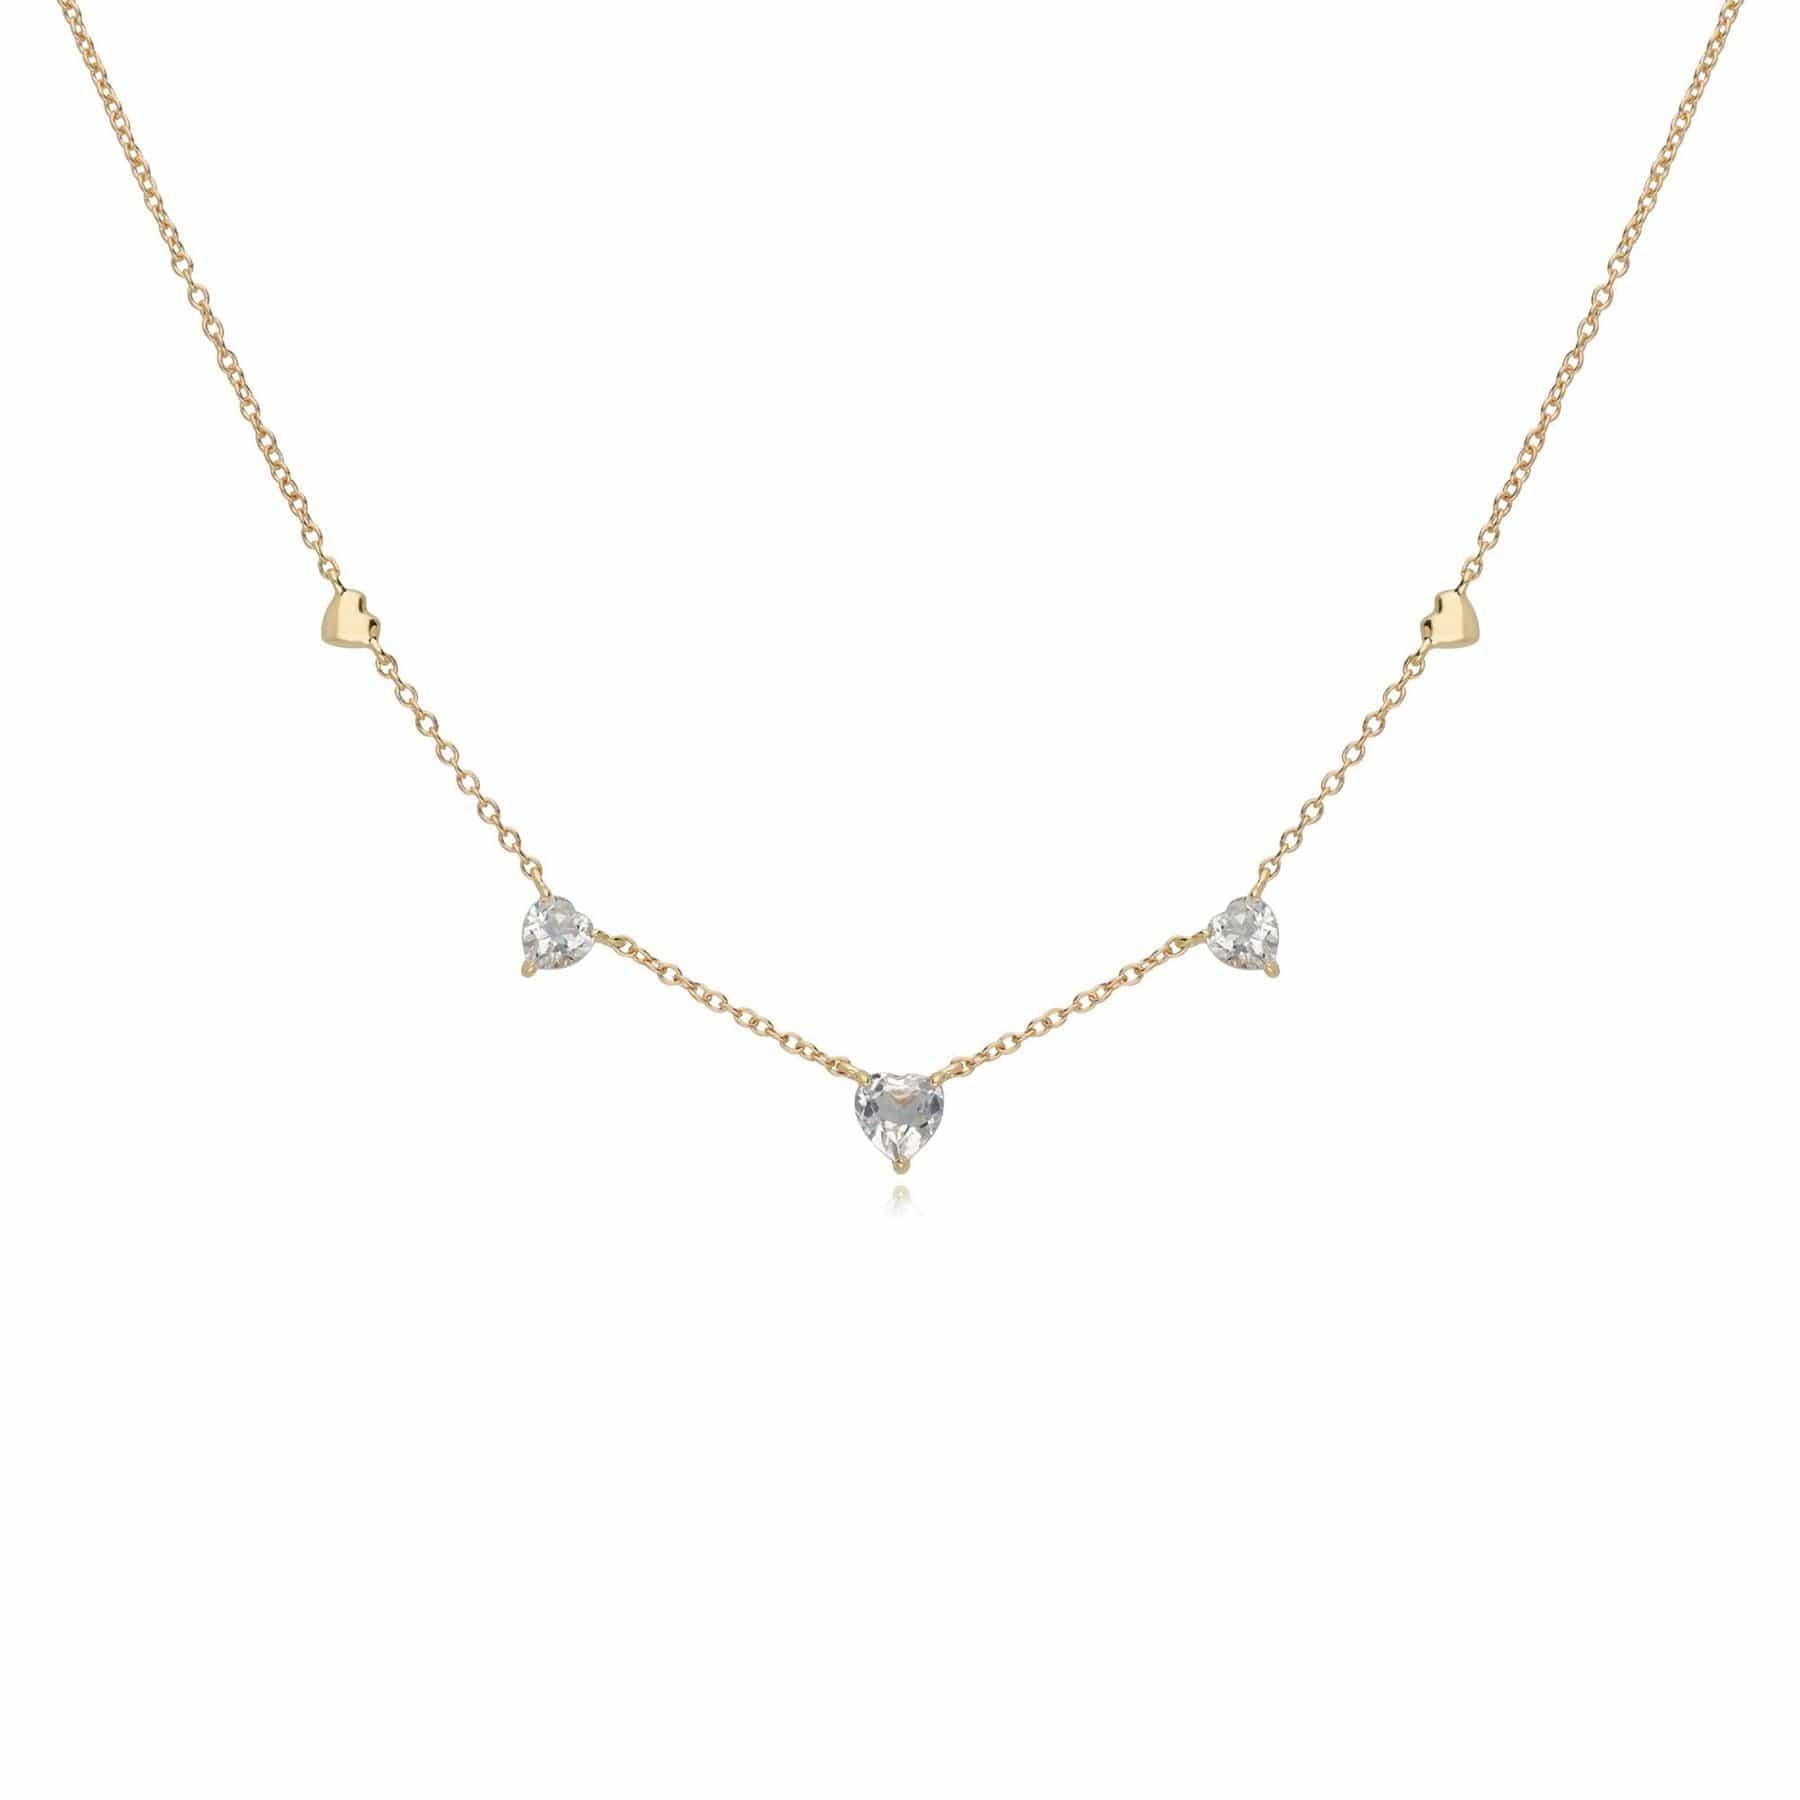 White Topaz Love Heart Necklace in 9ct Yellow Gold